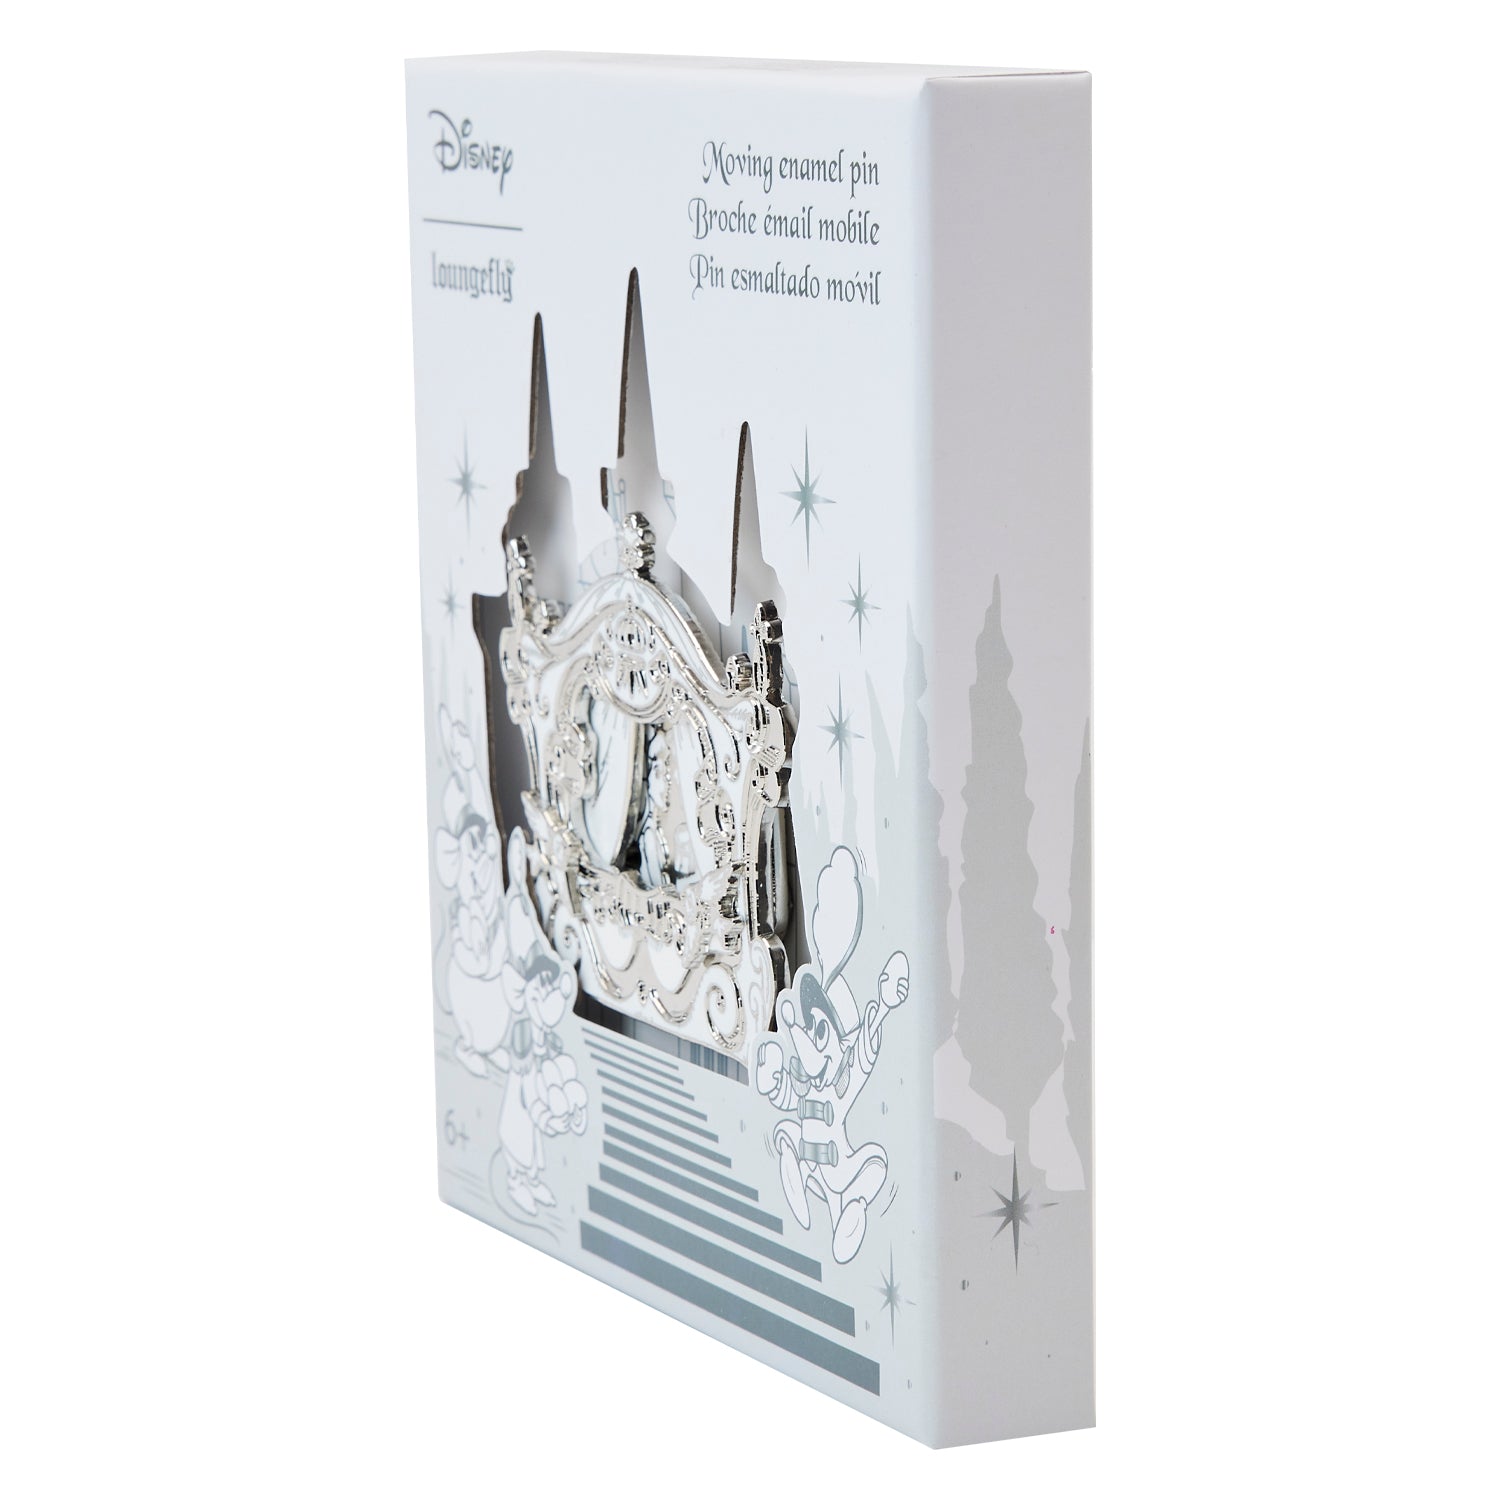 Loungefly Disney Cinderella Happily Ever After 3" Collector Box Sliding Pin Set